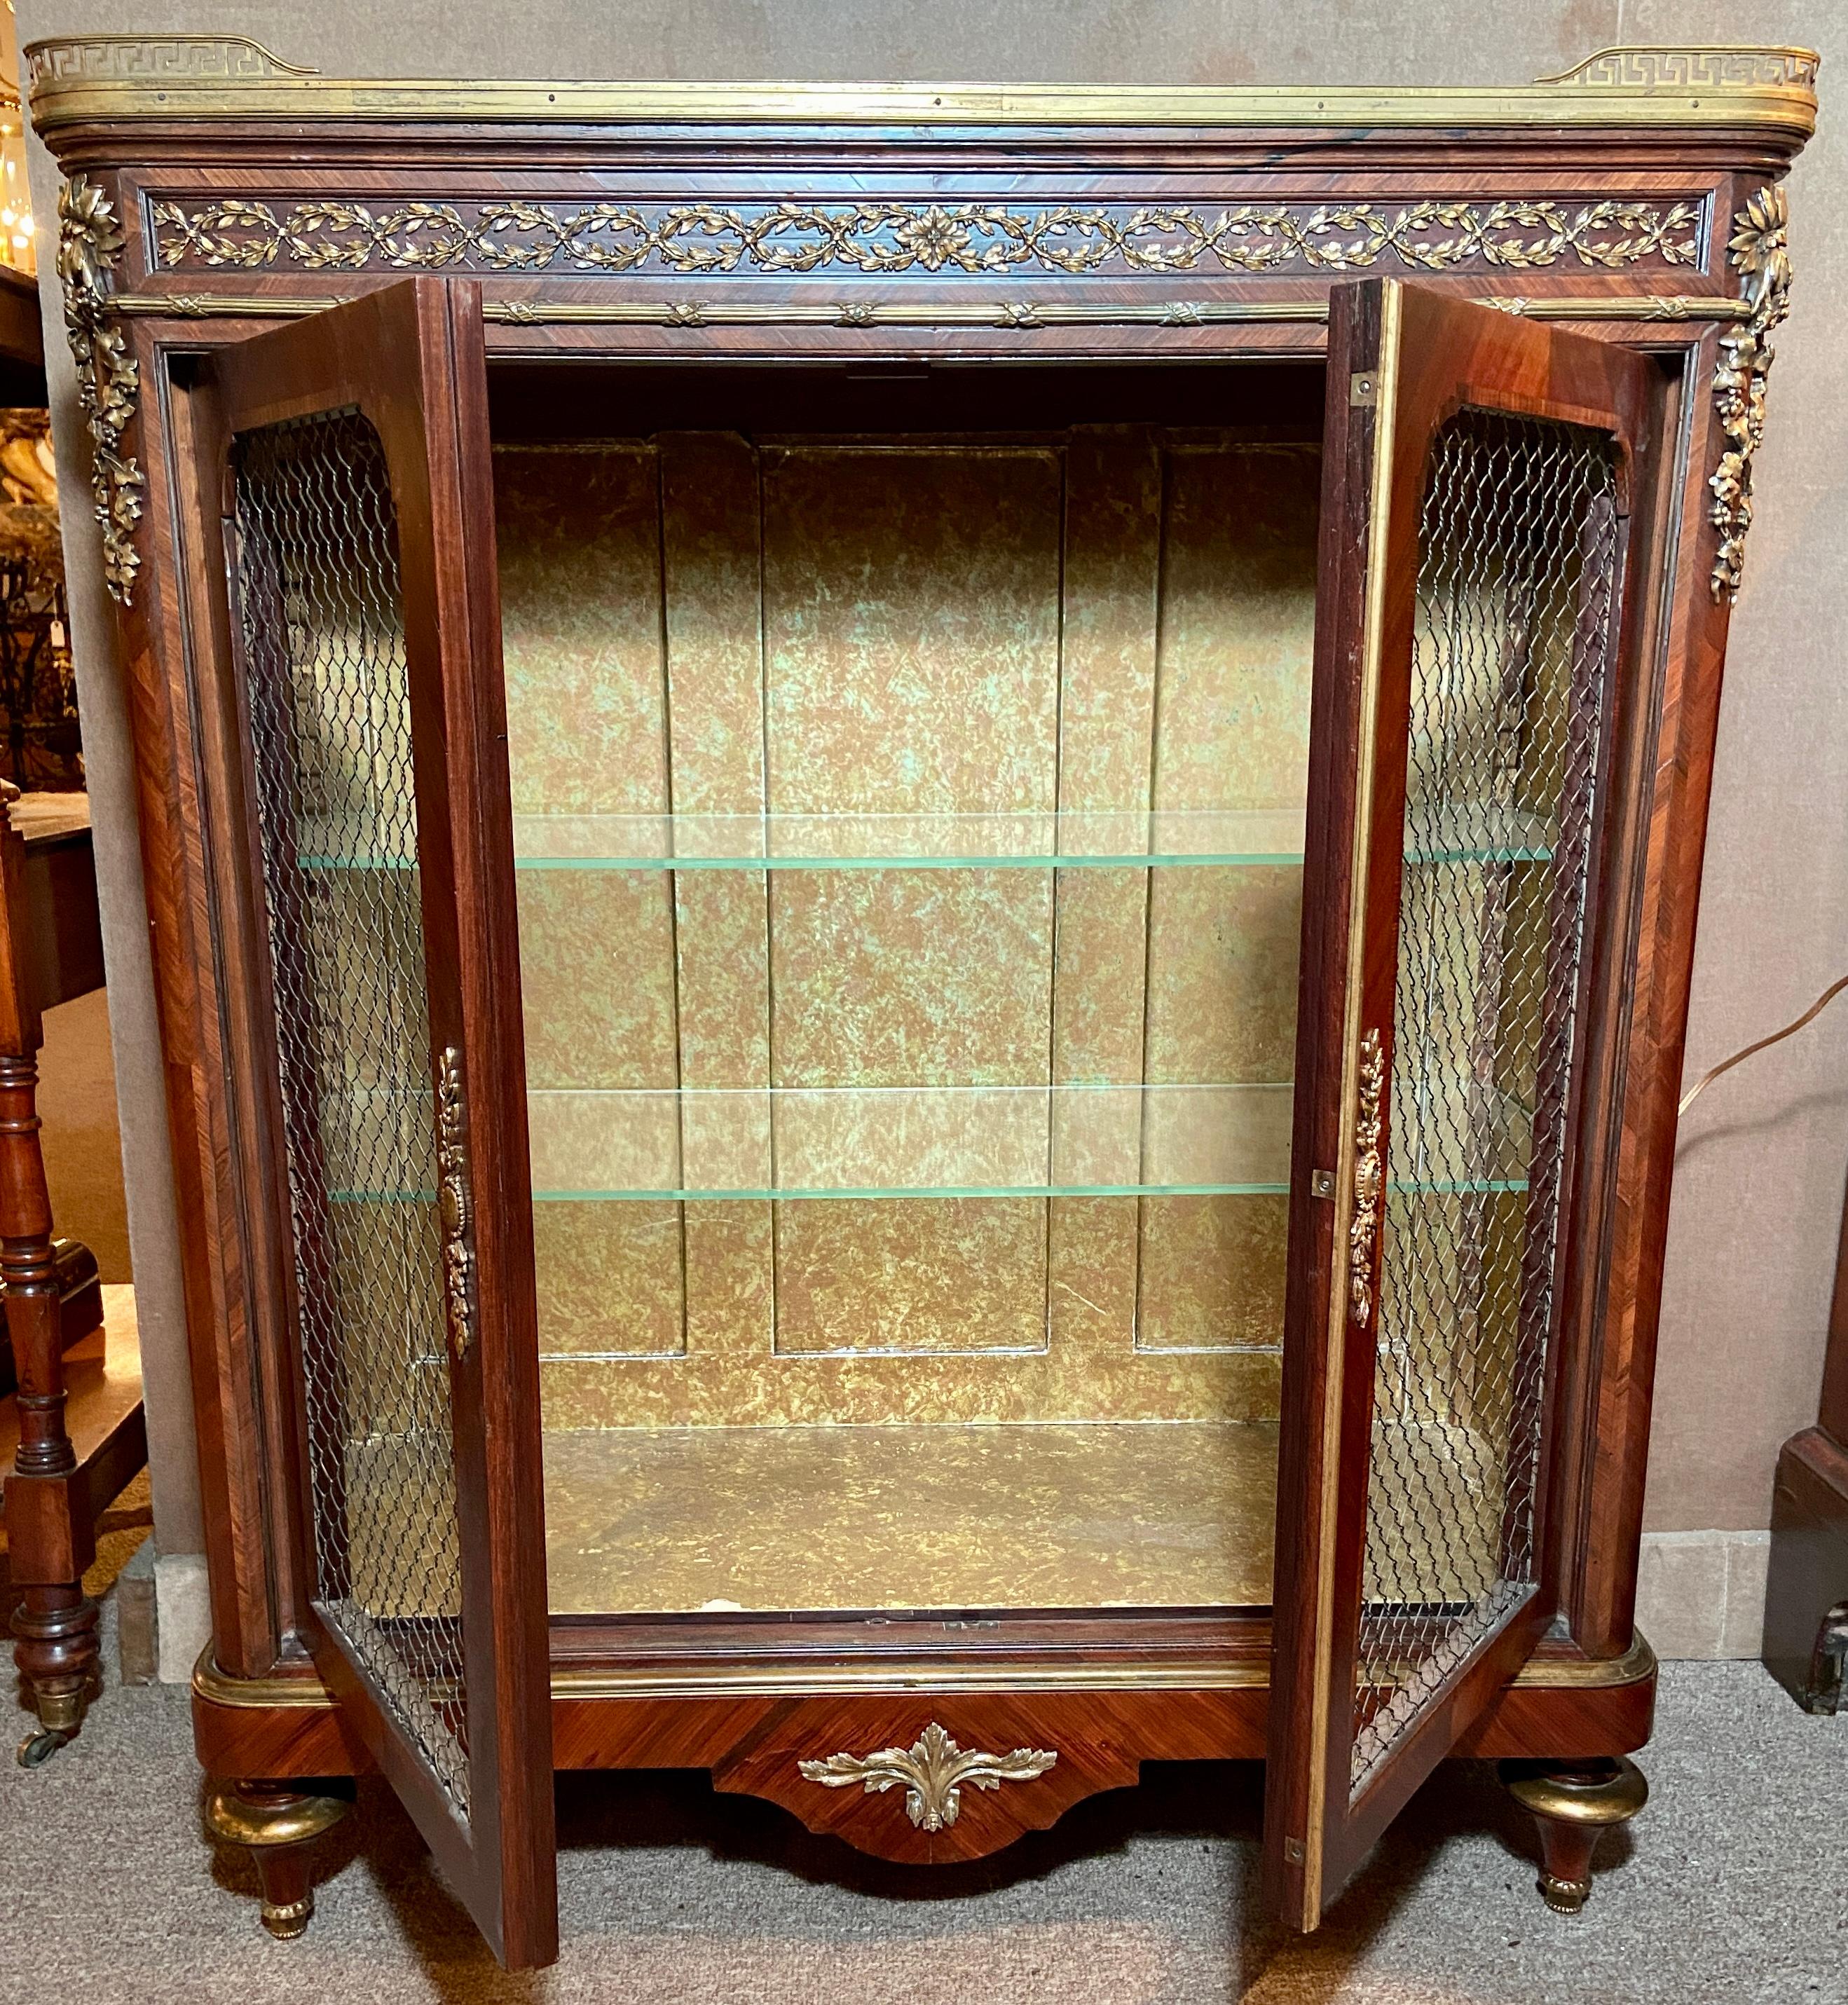 Pair Antique French Louis XVI Marble Top Cabinets, Circa 1890.
Very pretty cabinets with interior glass shelves, a galleried marble top and wire mesh fronts on doors.